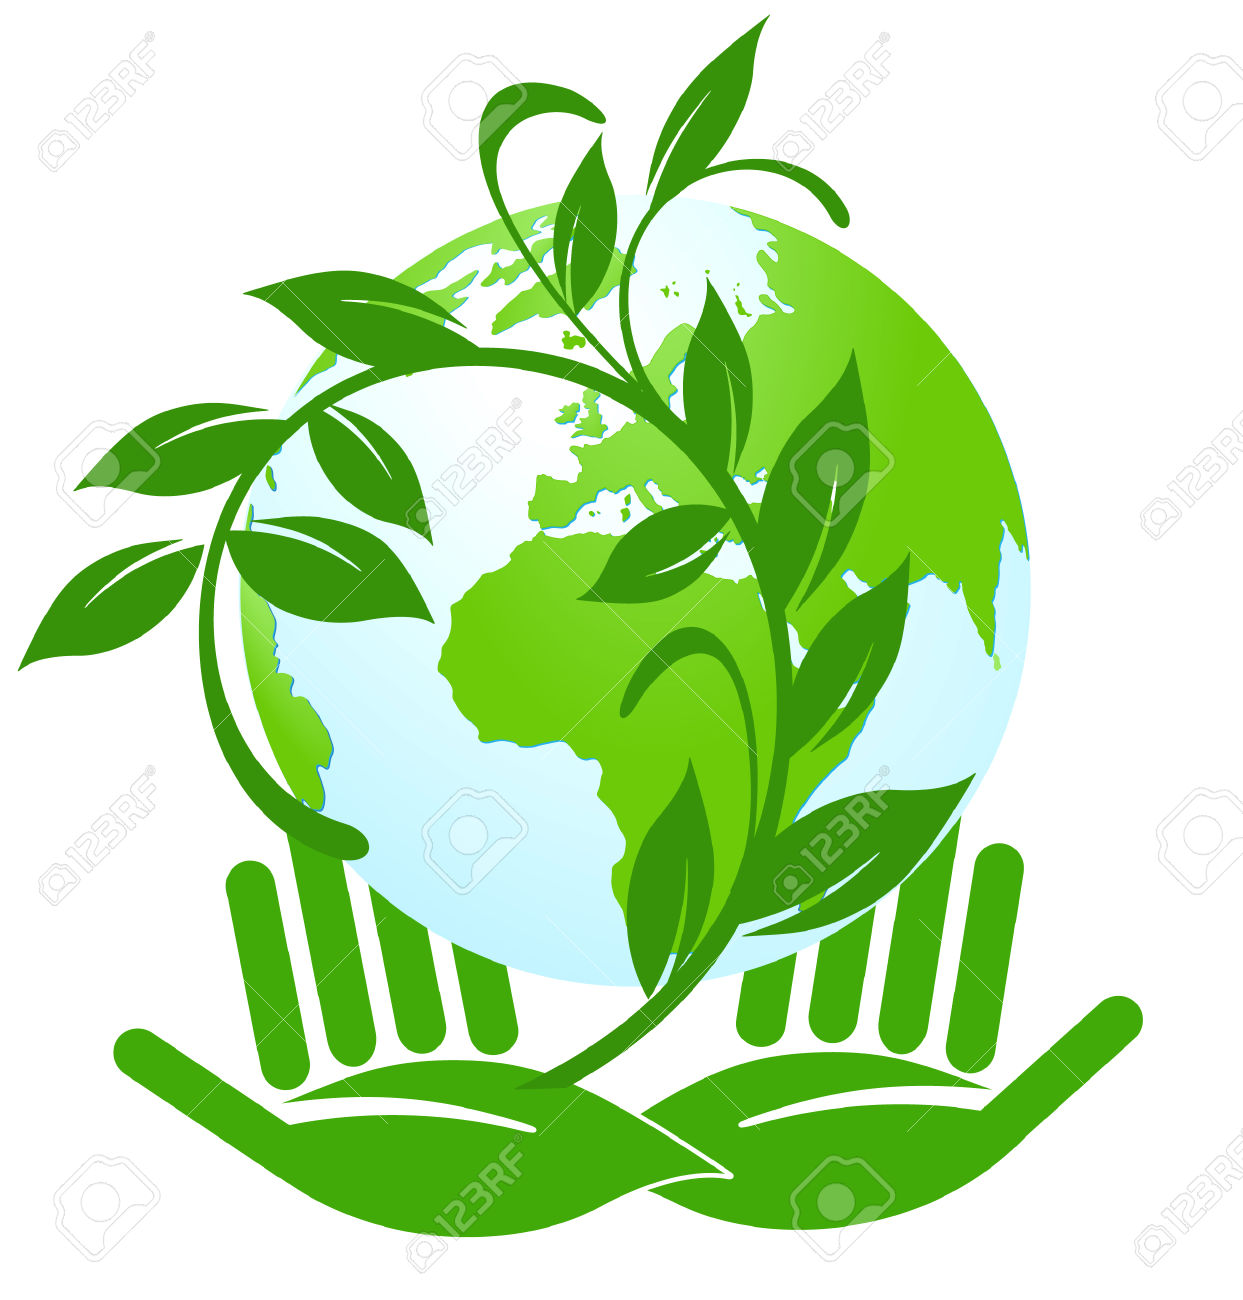 Climate change clipart 7 » Clipart Station.